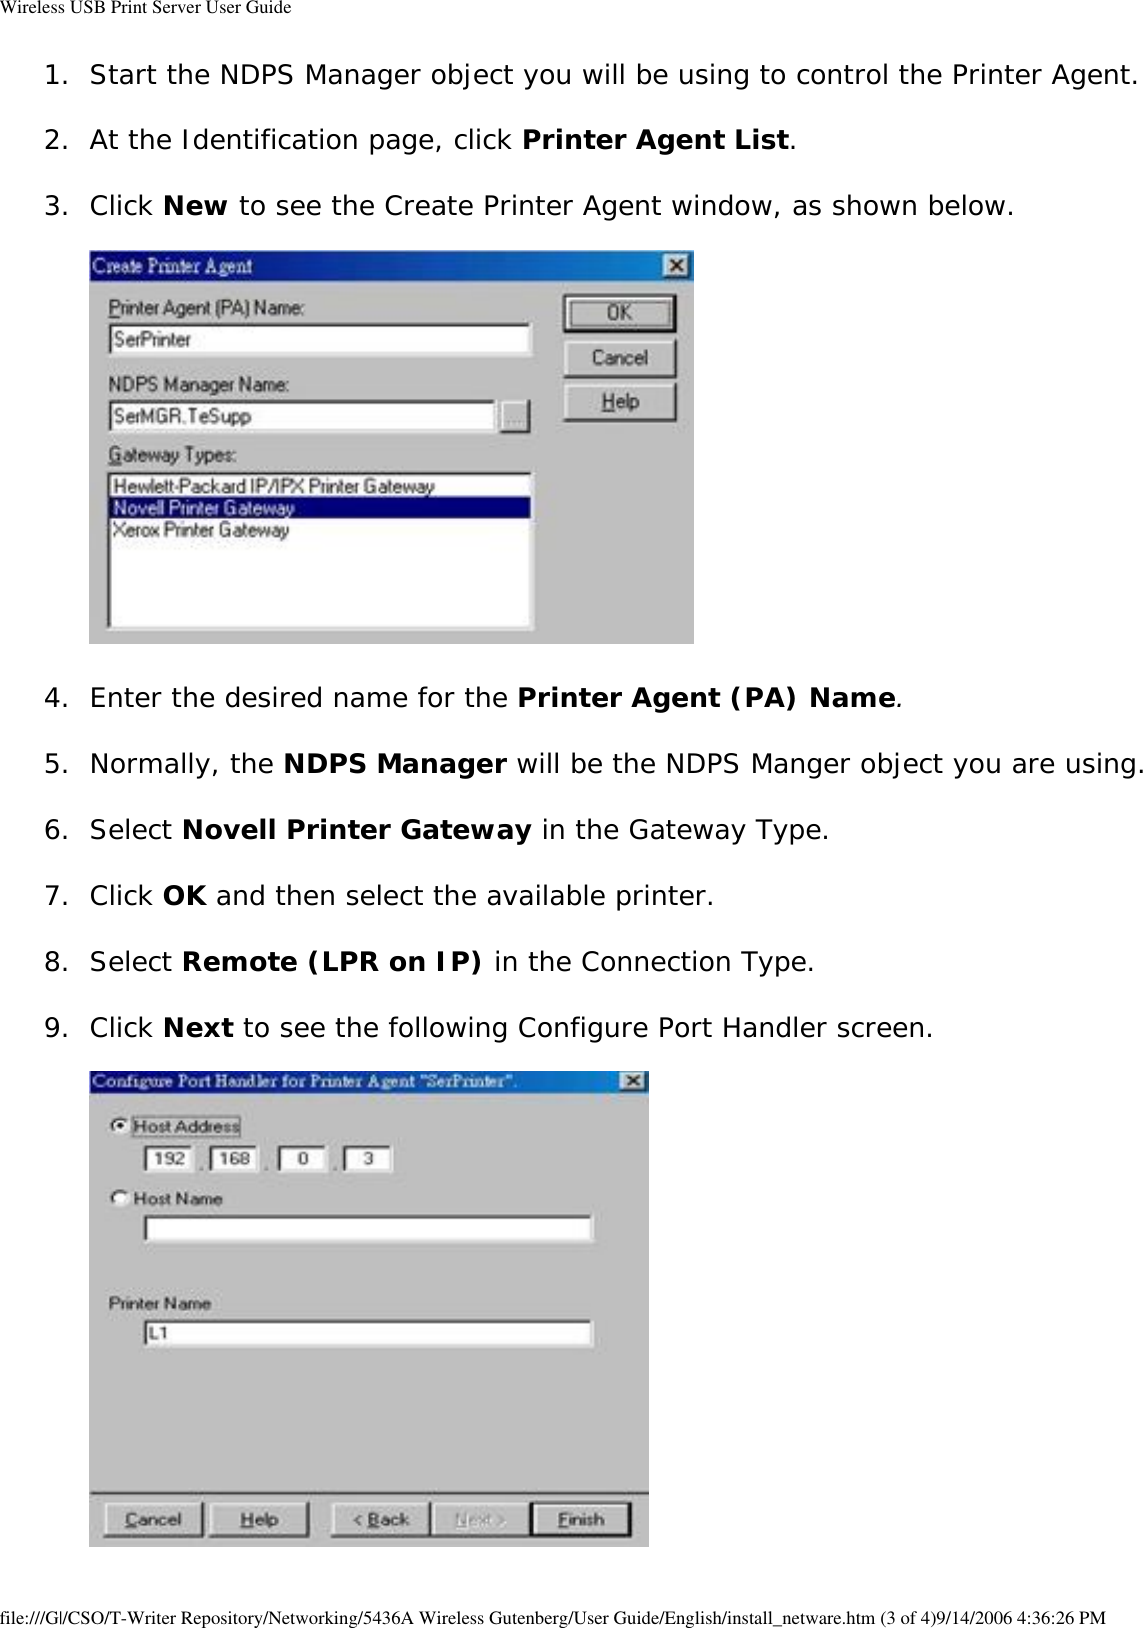 Wireless USB Print Server User Guide1.  Start the NDPS Manager object you will be using to control the Printer Agent. 2.  At the Identification page, click Printer Agent List. 3.  Click New to see the Create Printer Agent window, as shown below.    4.  Enter the desired name for the Printer Agent (PA) Name. 5.  Normally, the NDPS Manager will be the NDPS Manger object you are using. 6.  Select Novell Printer Gateway in the Gateway Type. 7.  Click OK and then select the available printer. 8.  Select Remote (LPR on IP) in the Connection Type. 9.  Click Next to see the following Configure Port Handler screen.    file:///G|/CSO/T-Writer Repository/Networking/5436A Wireless Gutenberg/User Guide/English/install_netware.htm (3 of 4)9/14/2006 4:36:26 PM